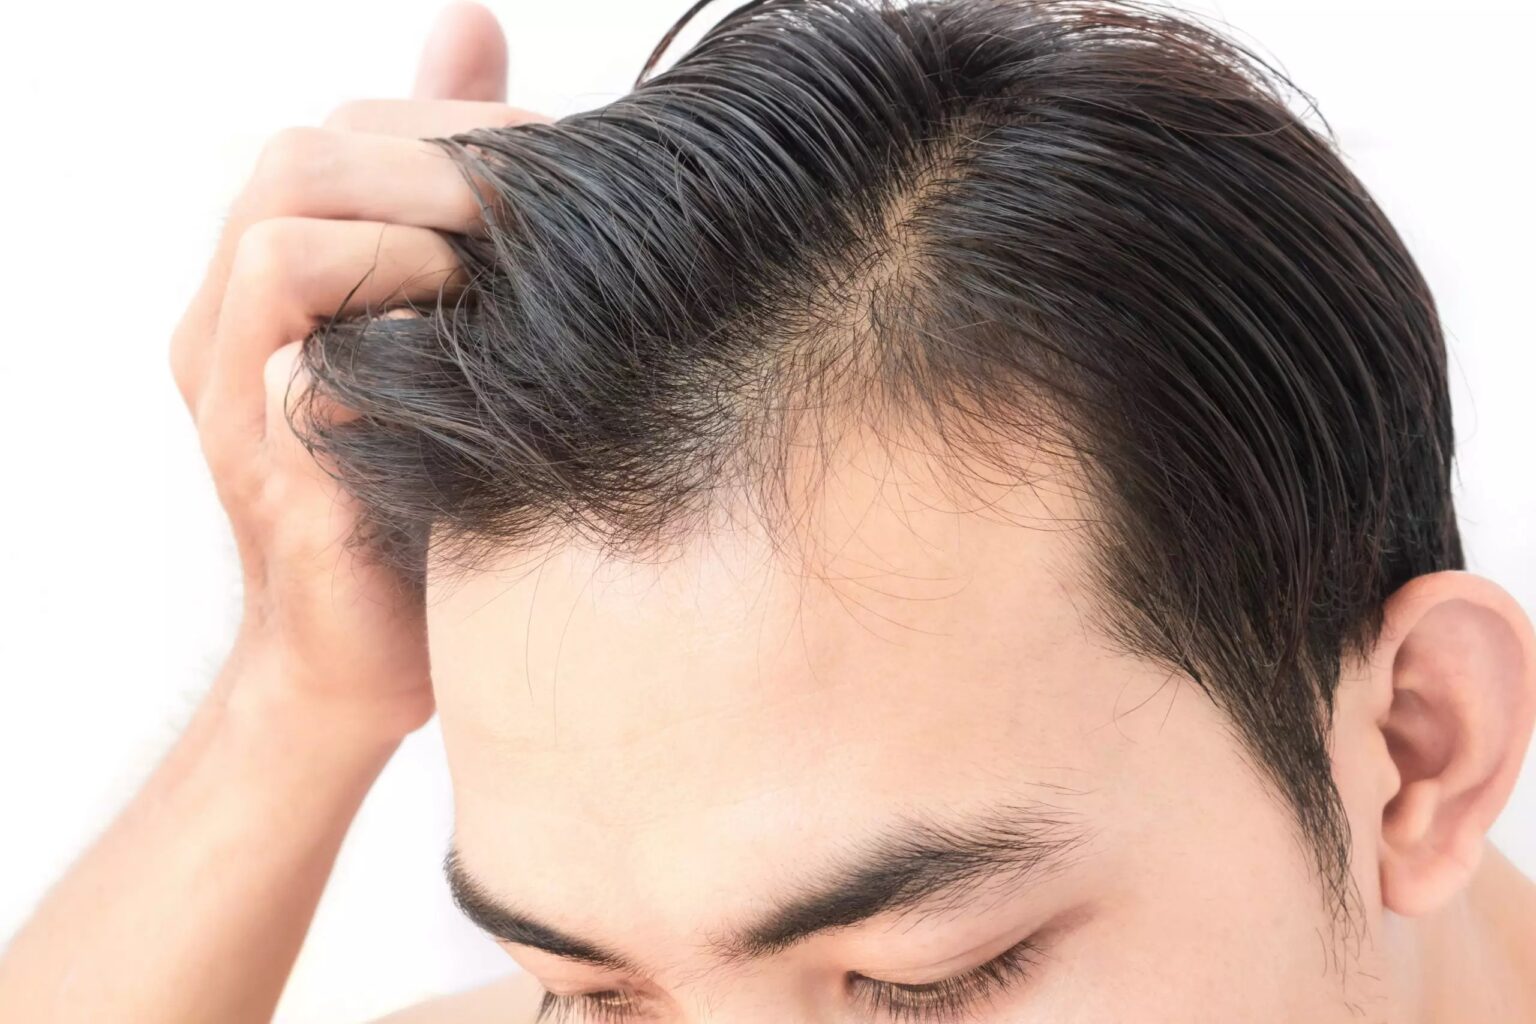 A hair transplant surgery is not a very hectic procedure especially when you go for well-qualified doctors.